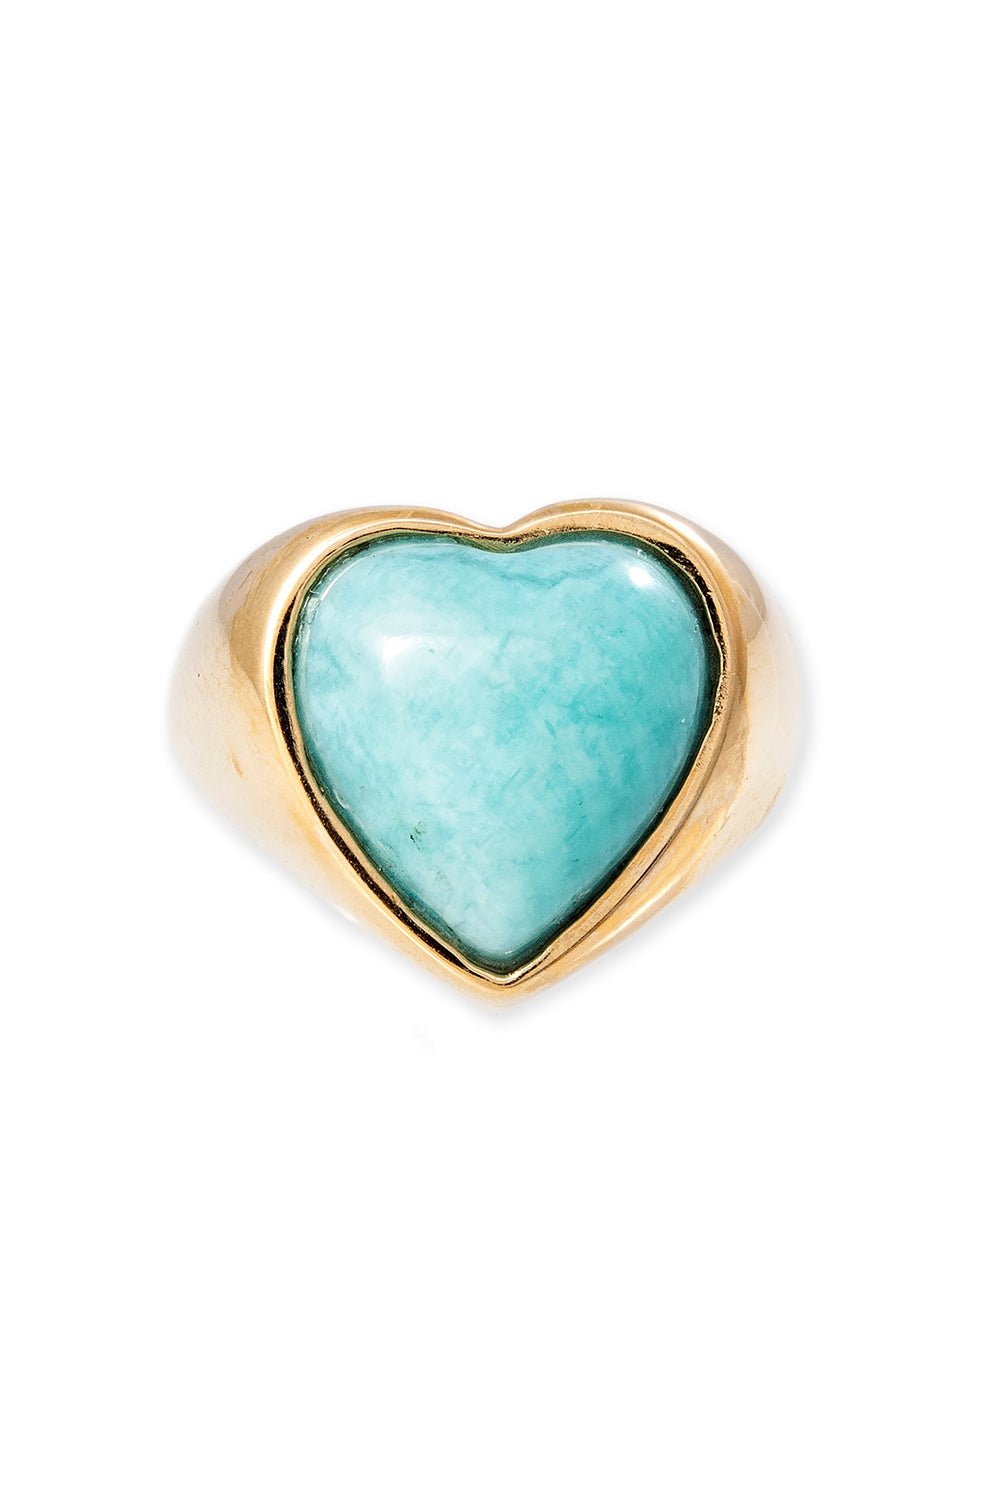 JACQUIE AICHE-Amazonite Heart Signet Ring-YELLOW GOLD